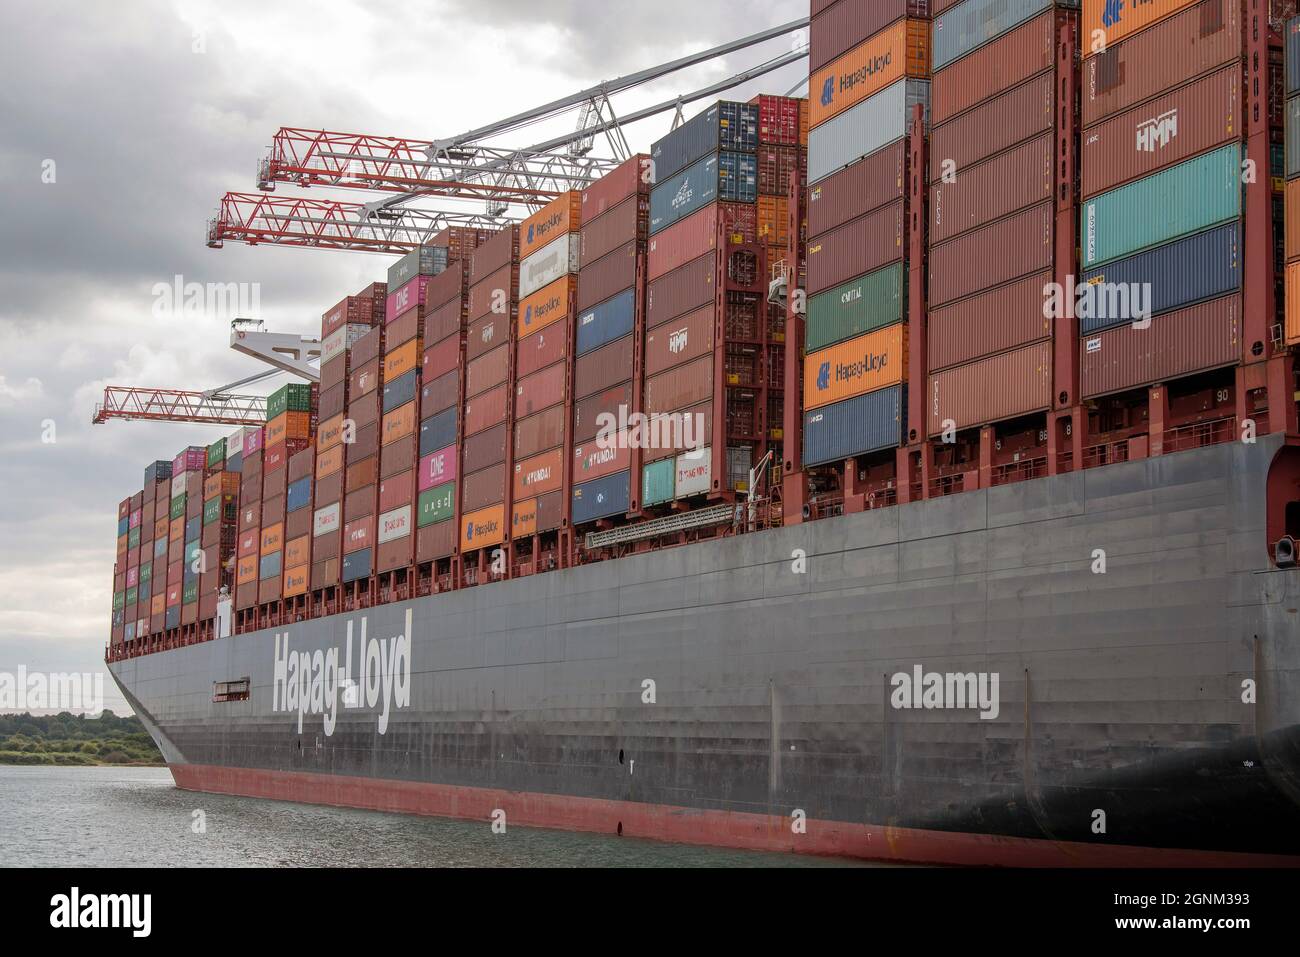 Southampton, England, UK. 2021.  Shipping containers stacked on a container ship alongside in a deep water port. Stock Photo